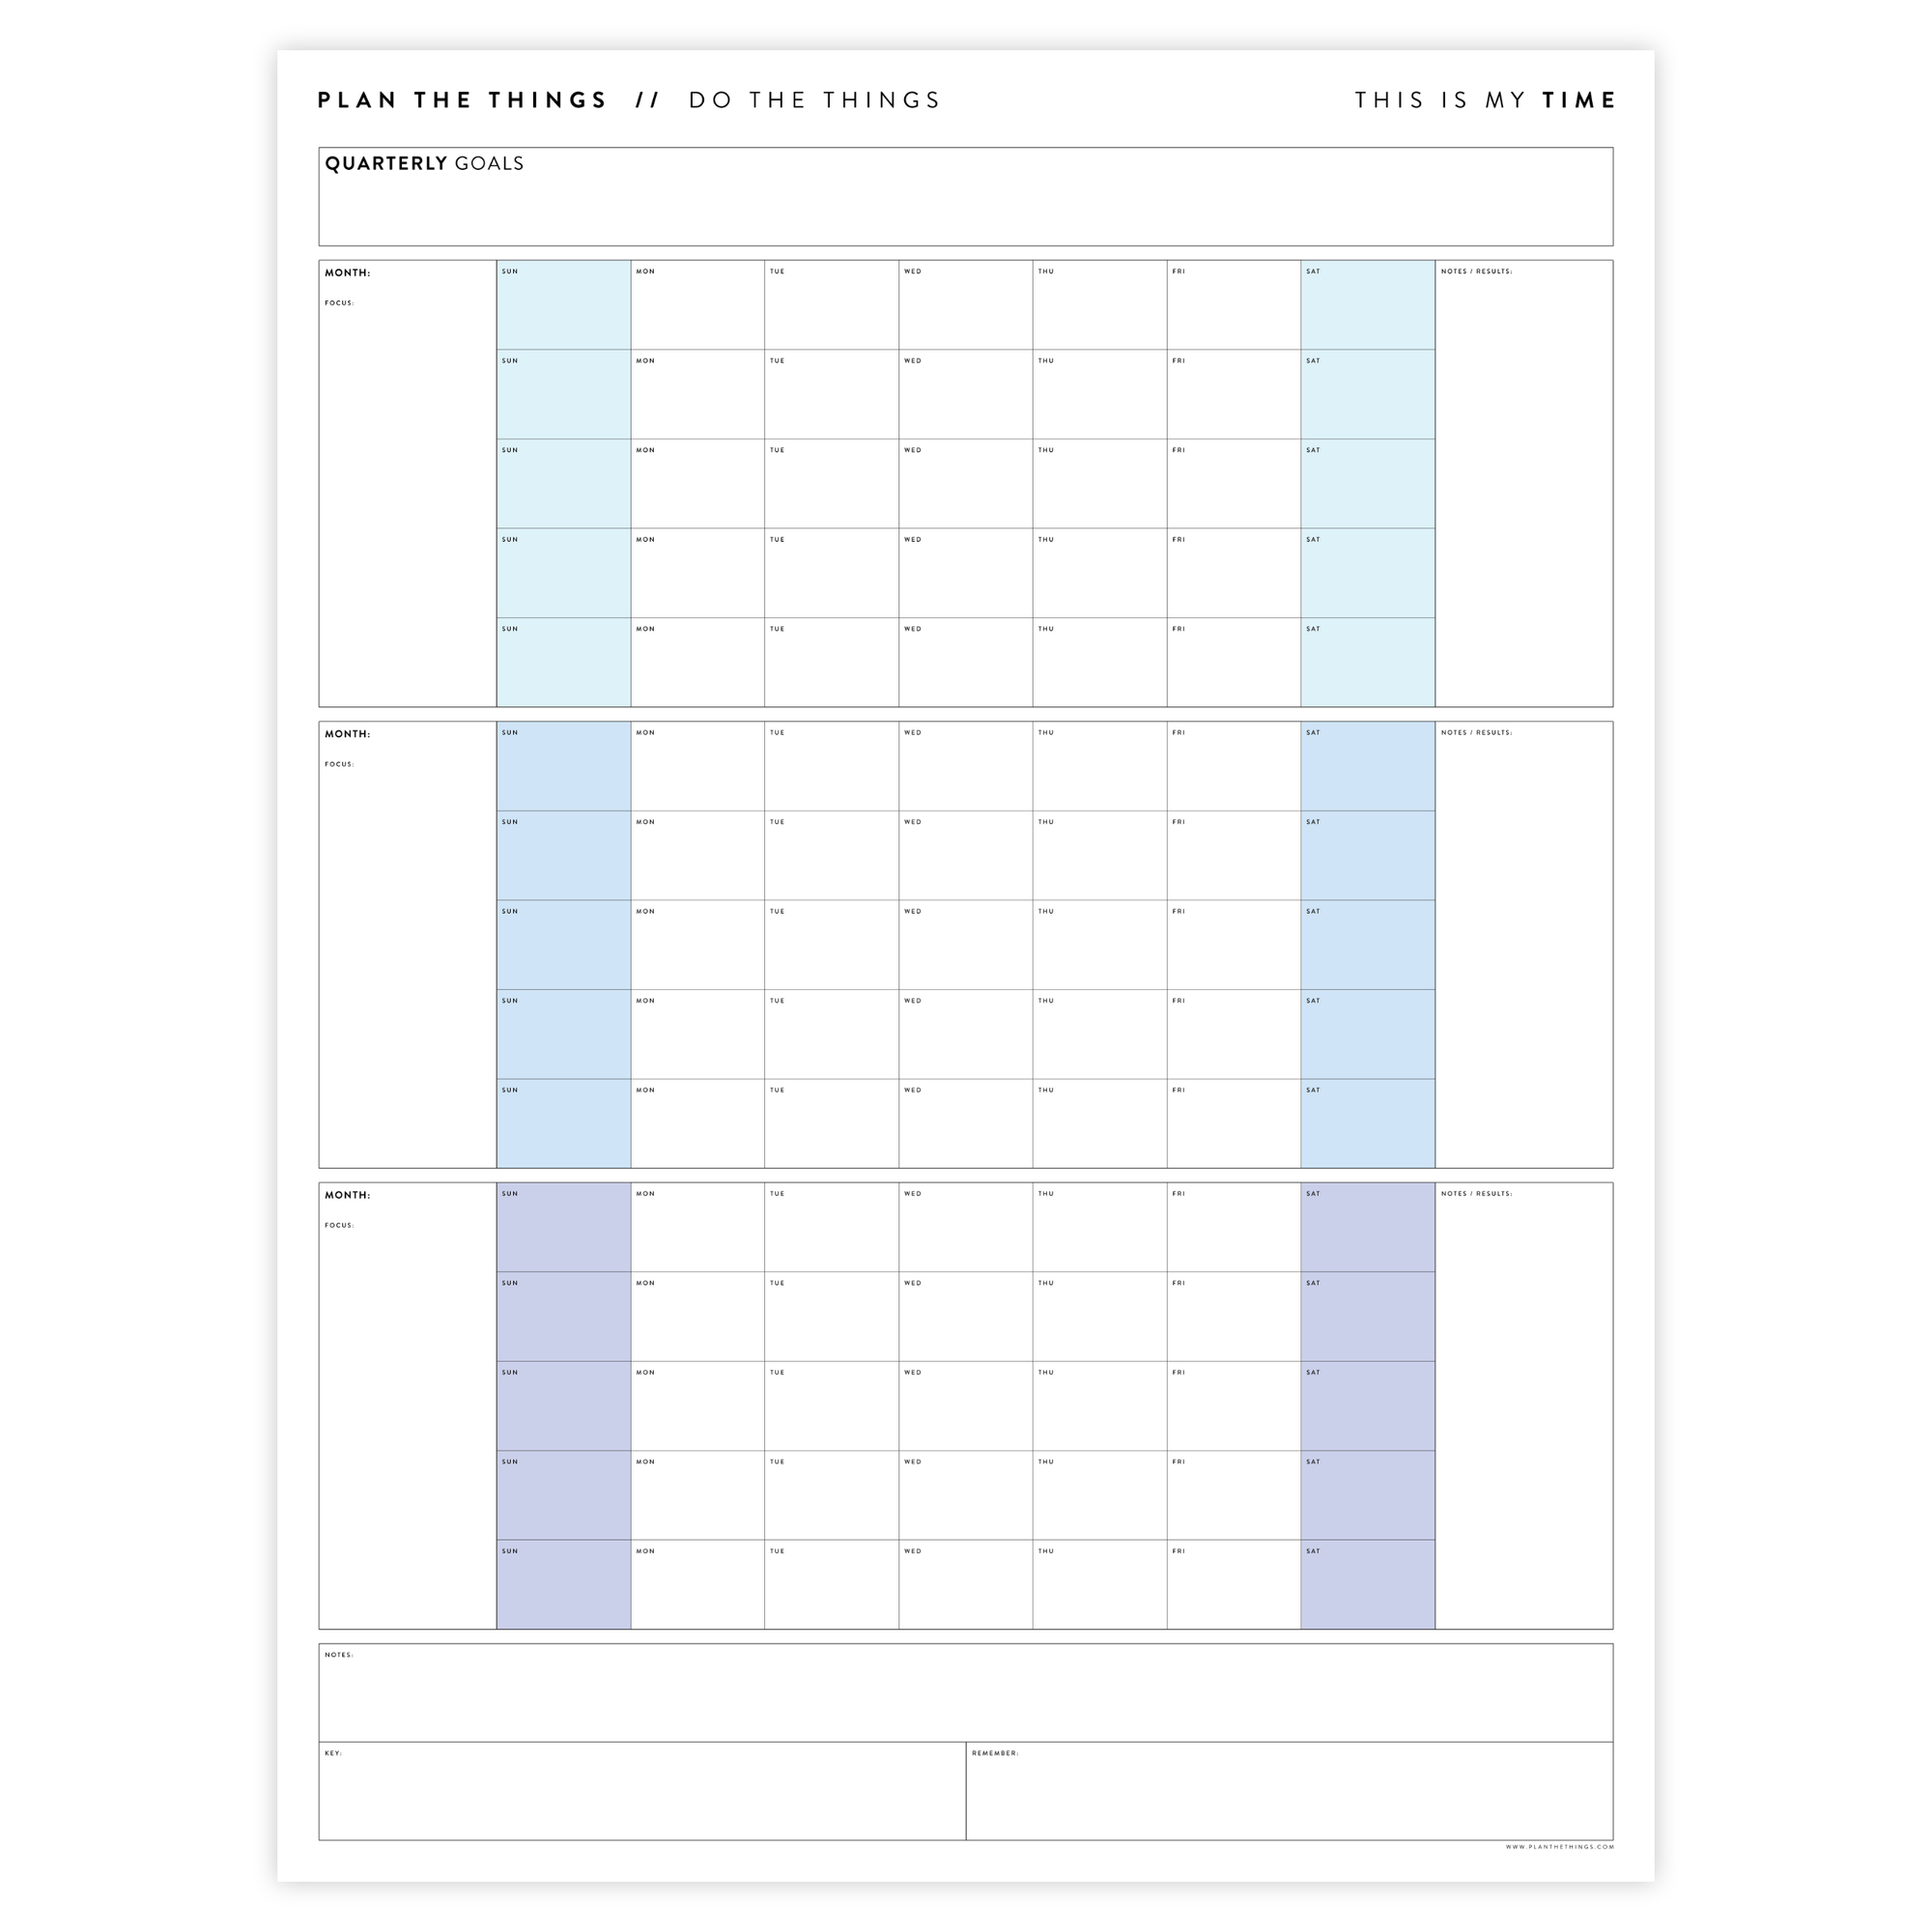 PRINTABLE UNDATED QUARTERLY WALL CALENDAR - SUNDAY START - RAINBOW (3) WEEKENDS - INSTANT DOWNLOAD